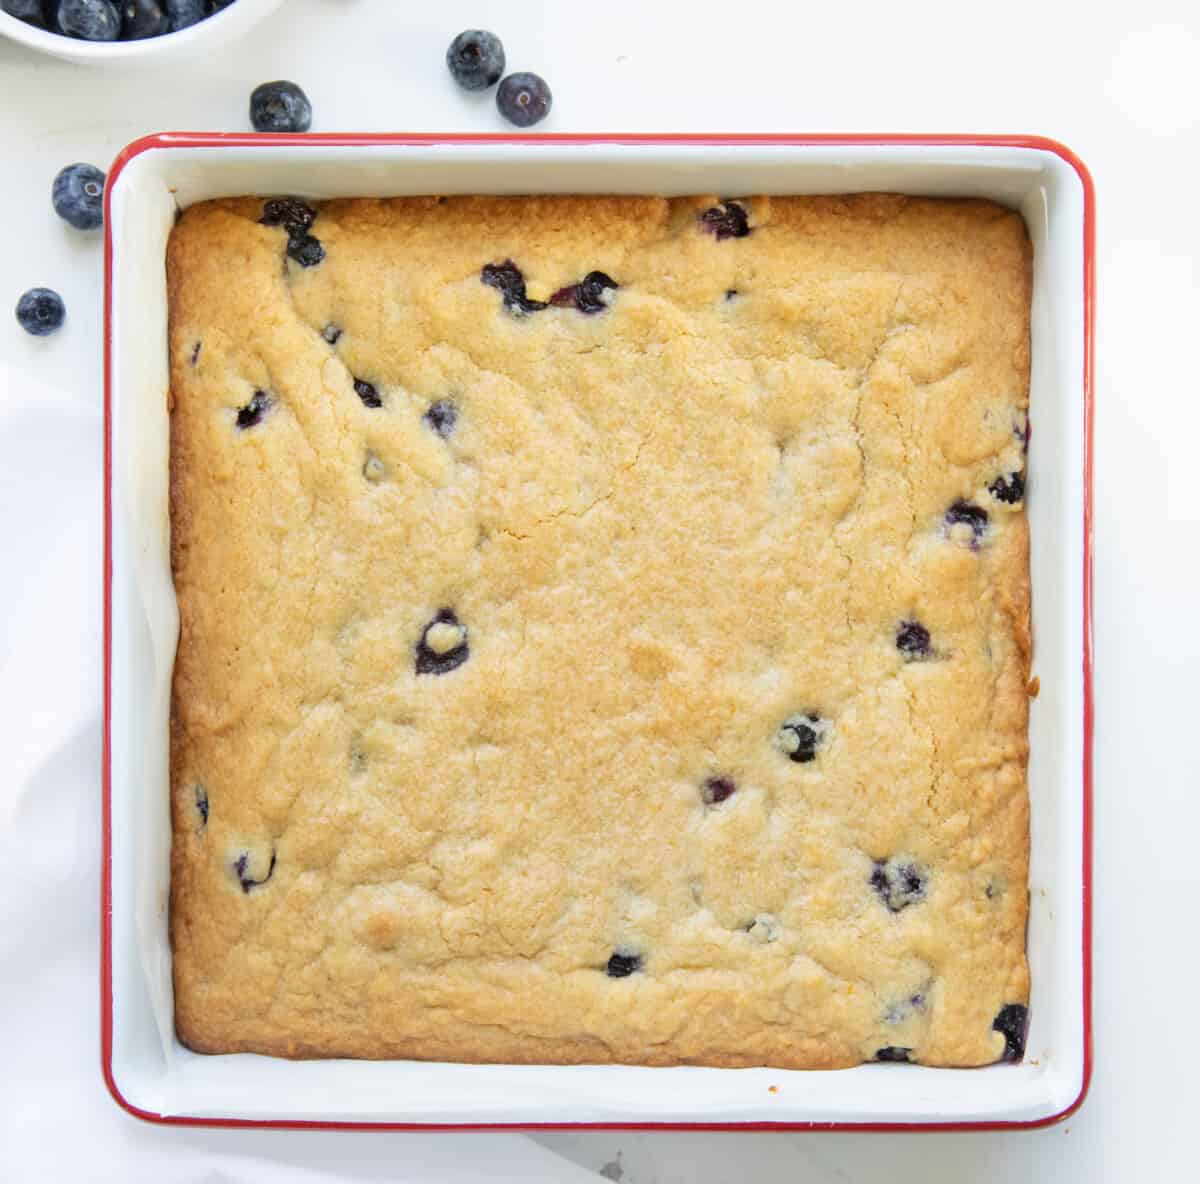 Pan of Lemon Blueberry Blondies on a white table from overhead.